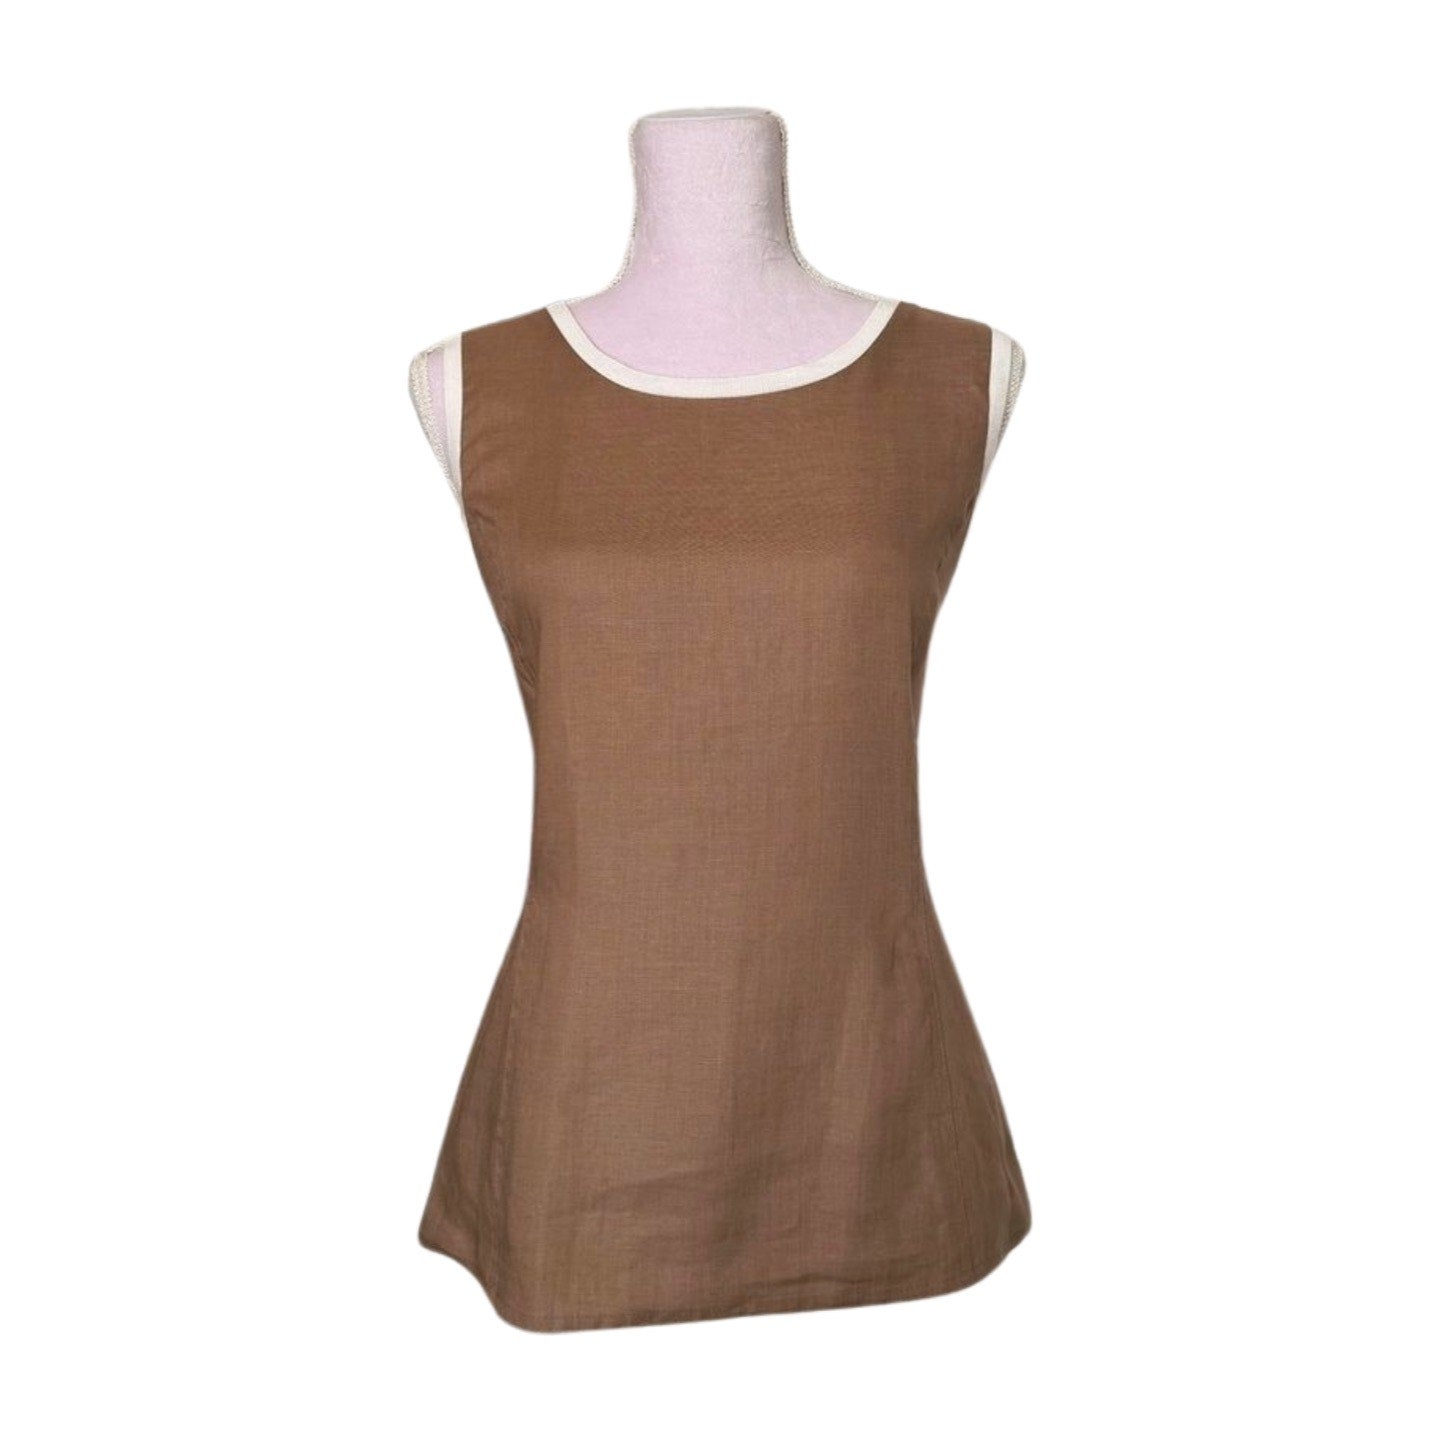 A sleeveless brown Valentino Miss V Linen Tank Top with a fitted silhouette is displayed on a mannequin. The top features a white trim along the neckline and armholes. Made from 100% linen, it appears lightweight and perfect as a summer top for casual wear. The background is plain white.